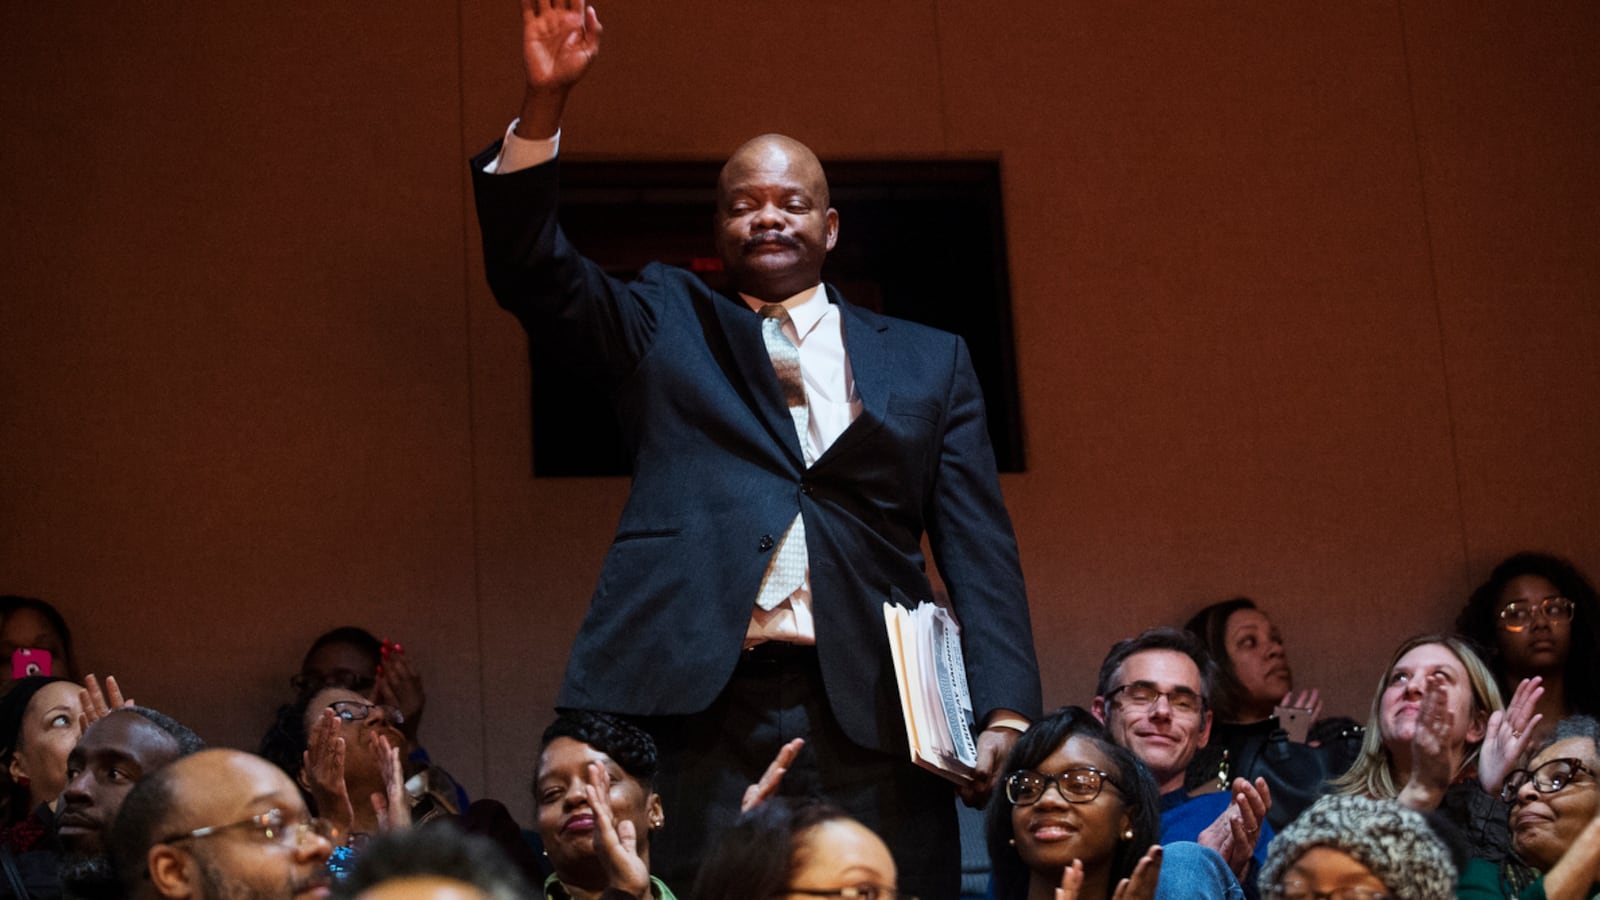 Detroit Board of Education member LaMar Lemmons waves to the audience during "School Days," an evening of storytelling focused on the Detroit Public Schools hosted by Chalkbeat Detroit and The Secret Society of Twisted Storytellers in March 2017